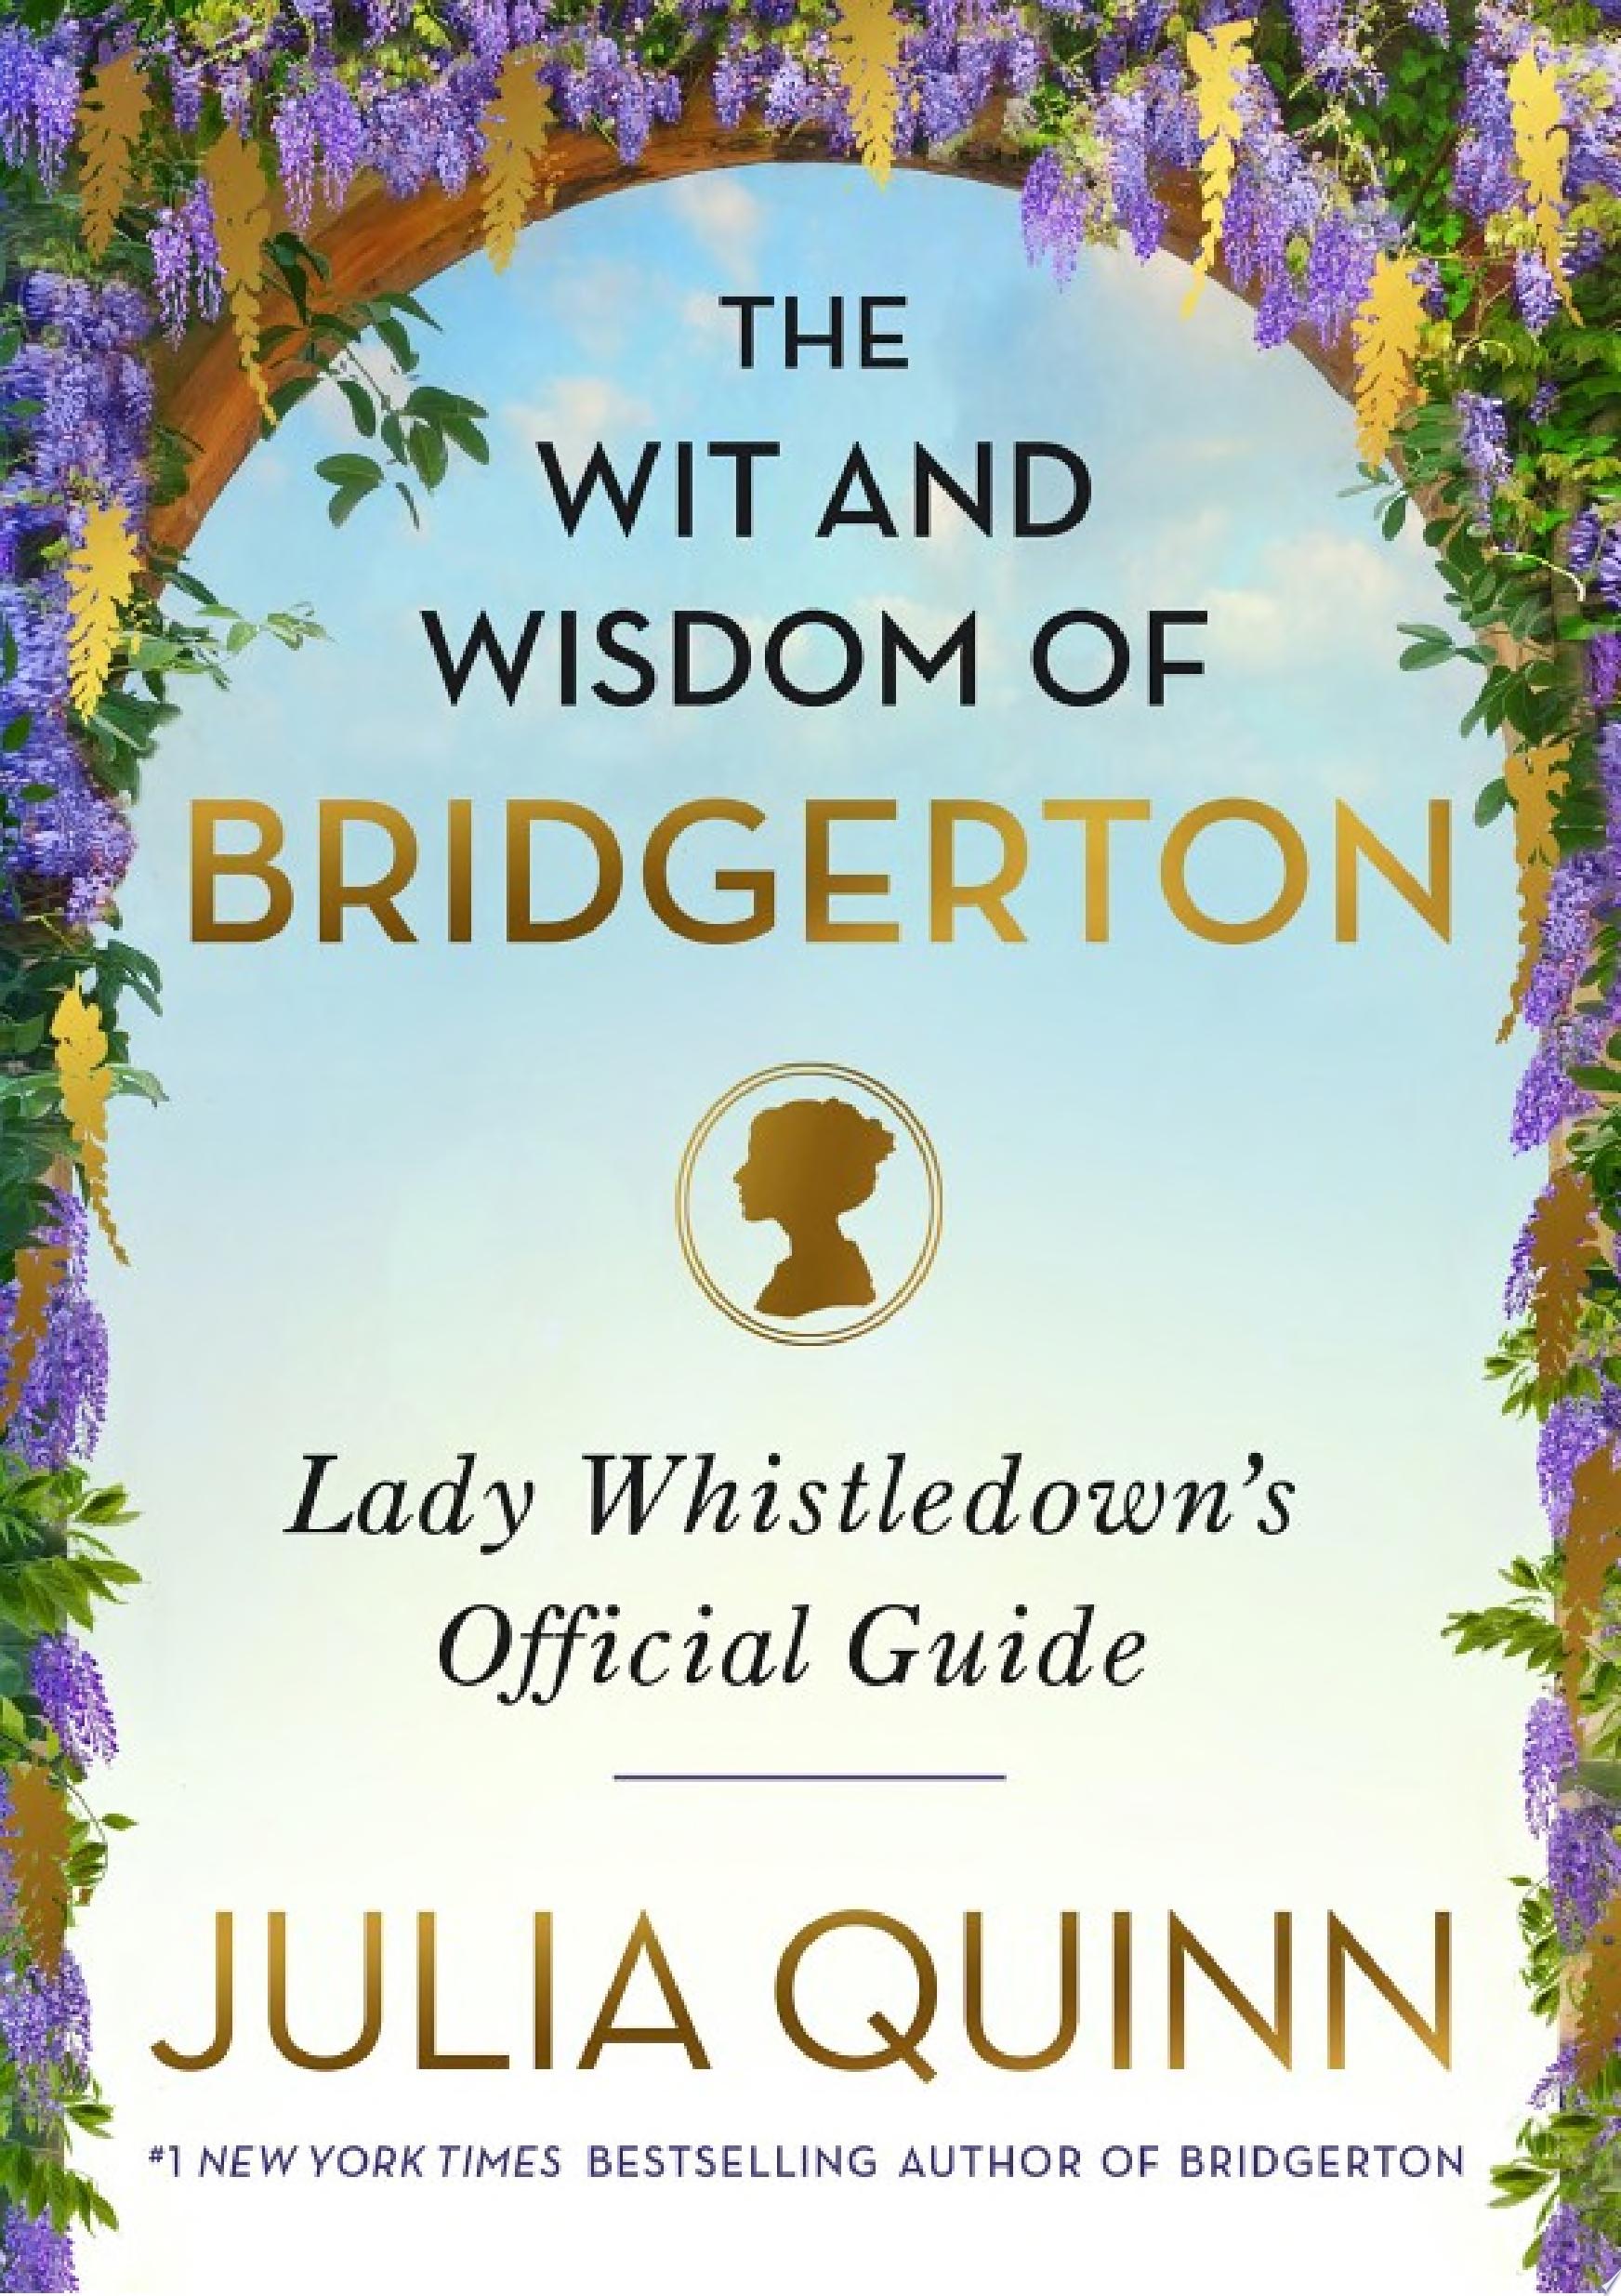 Image for "The Wit and Wisdom of Bridgerton"